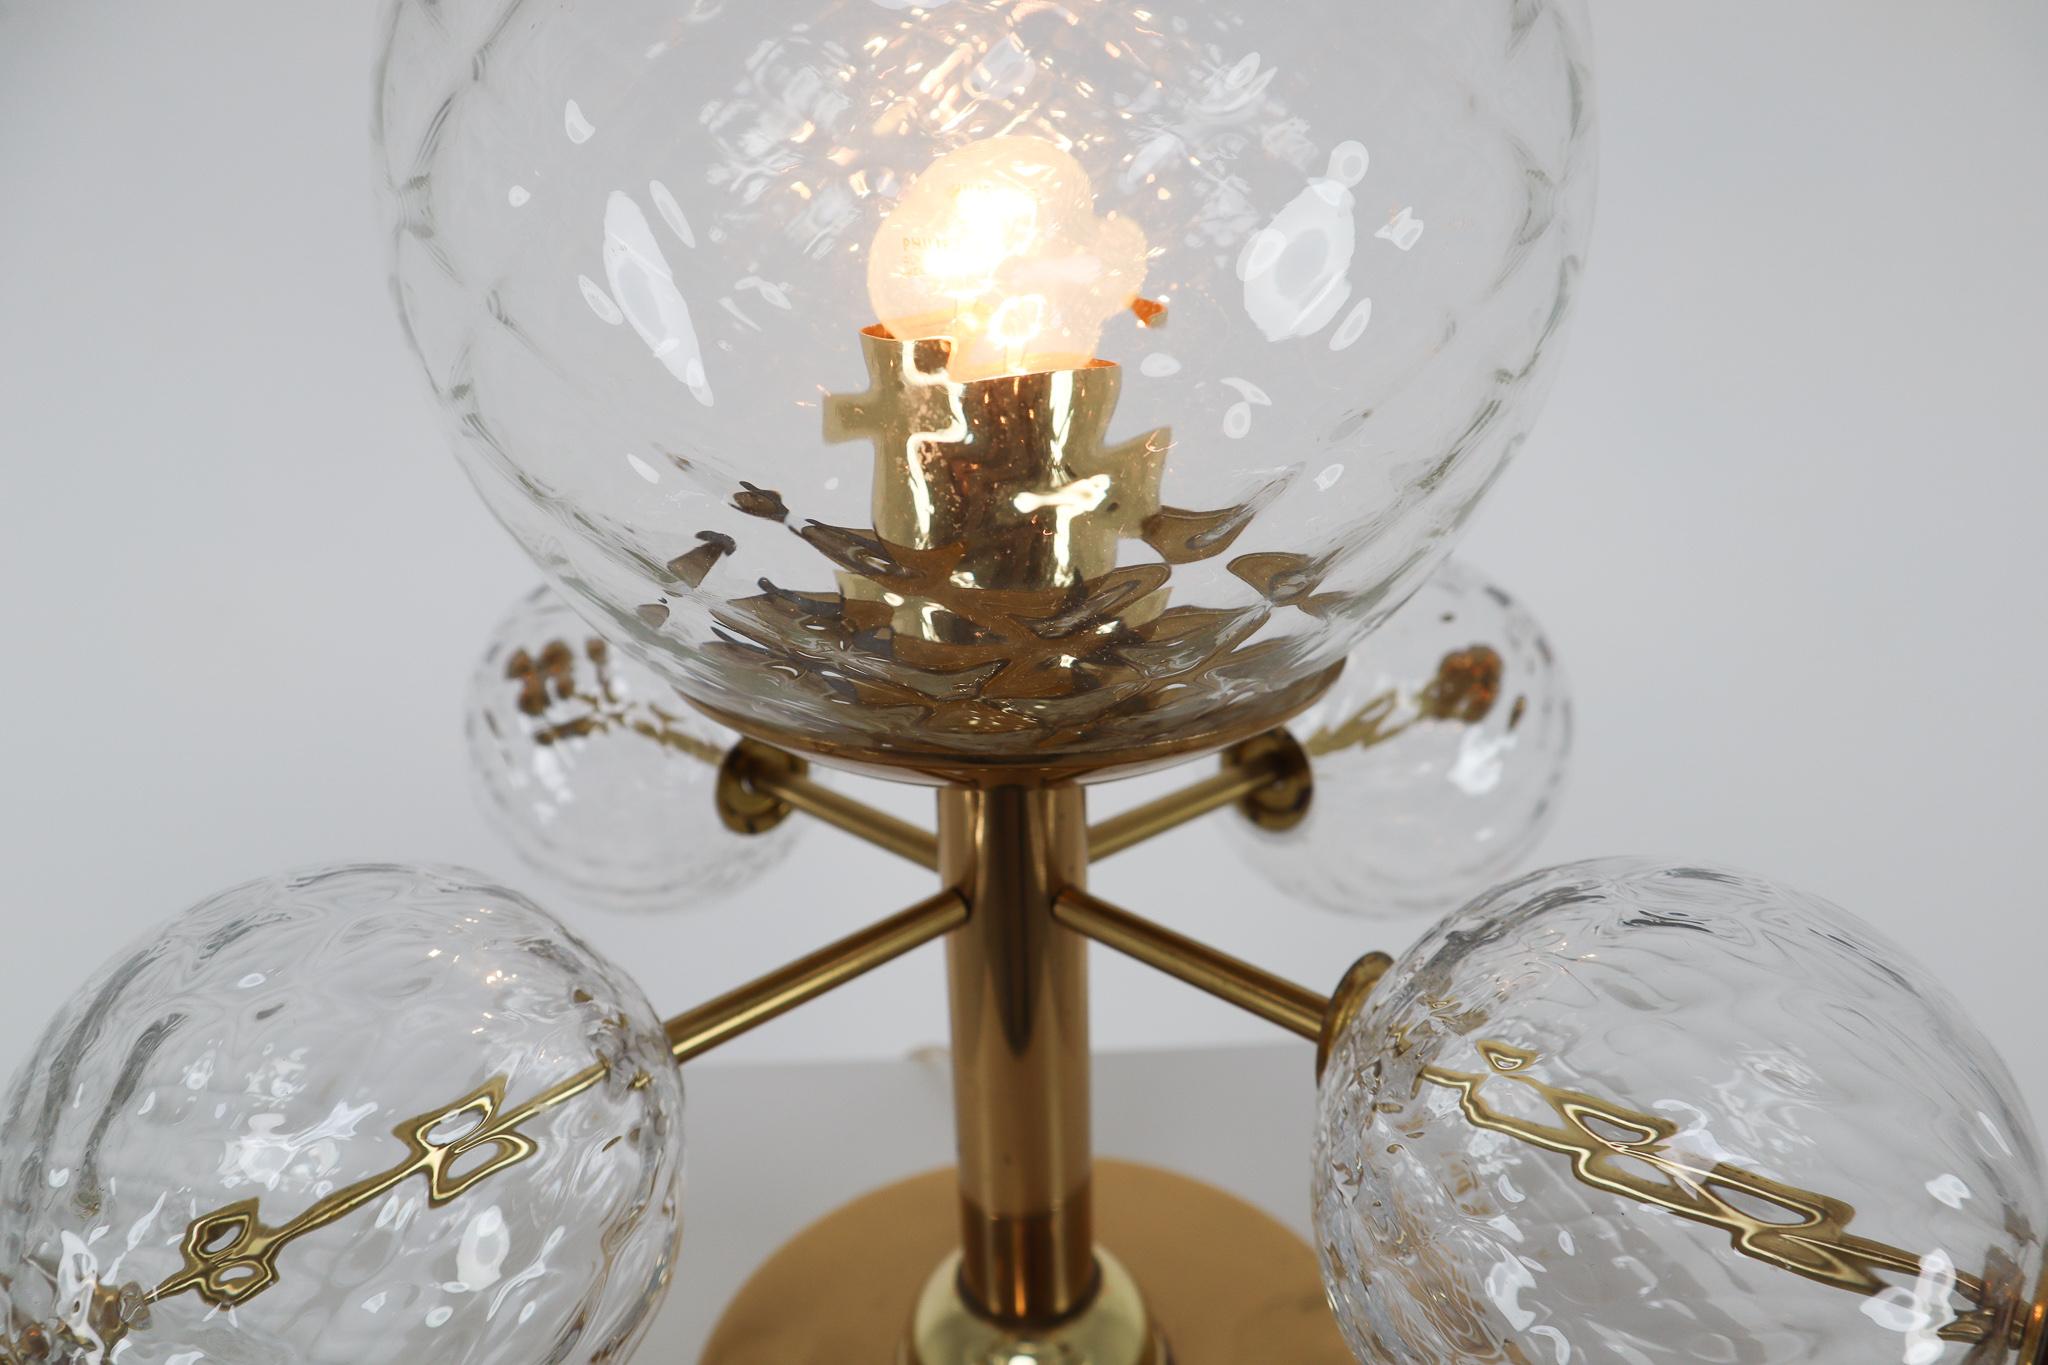 Midcentury Table Lamp with Brass Fixture and Structured Glass, Europe, 1970s For Sale 1